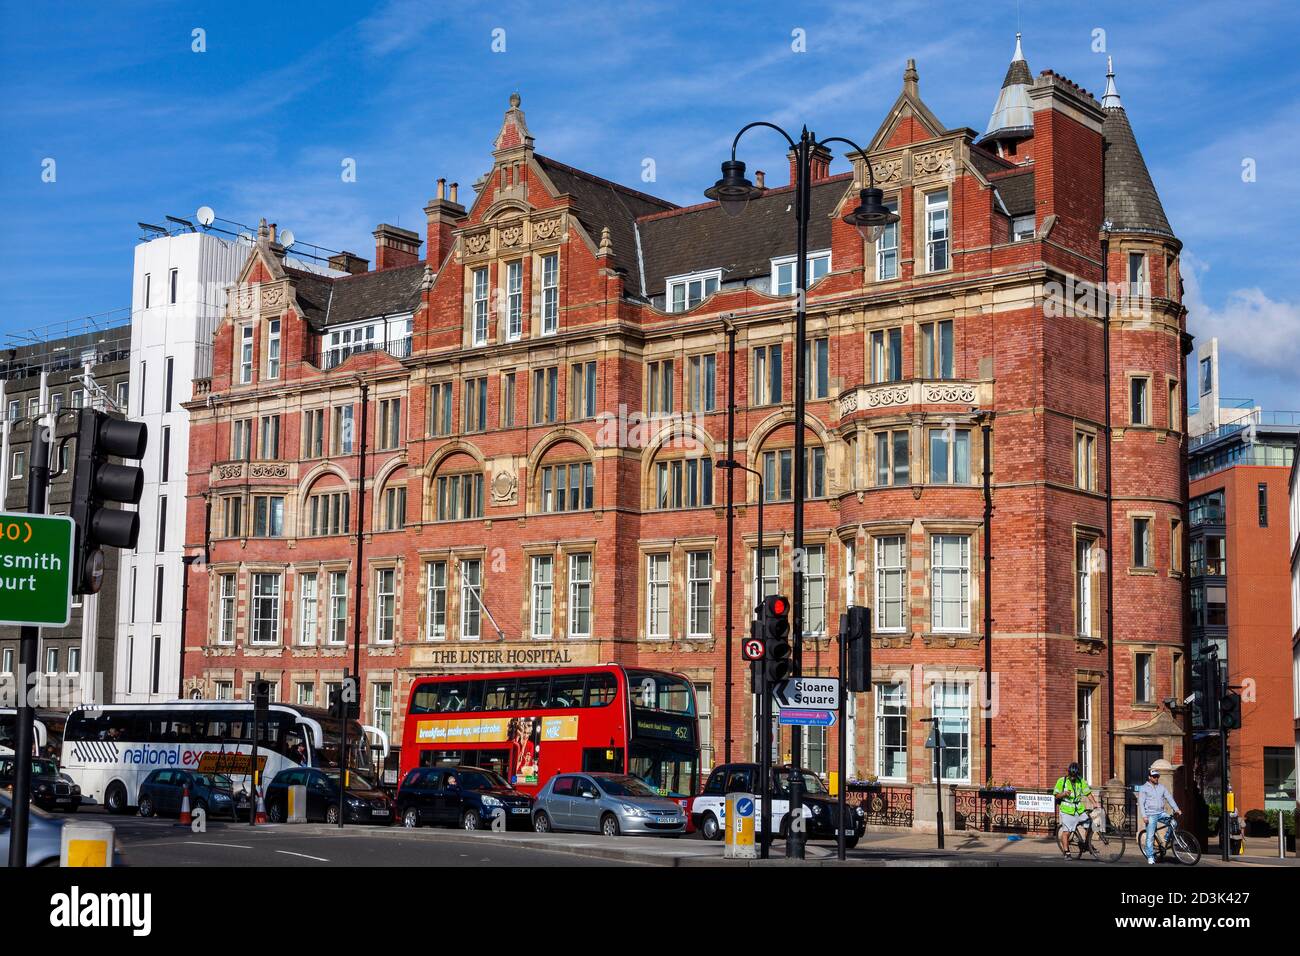 London, UK, February 26, 2012 : The Lister Hospital is a private health care treatment clinic in Chelsea operating on the former premises of the Liste Stock Photo